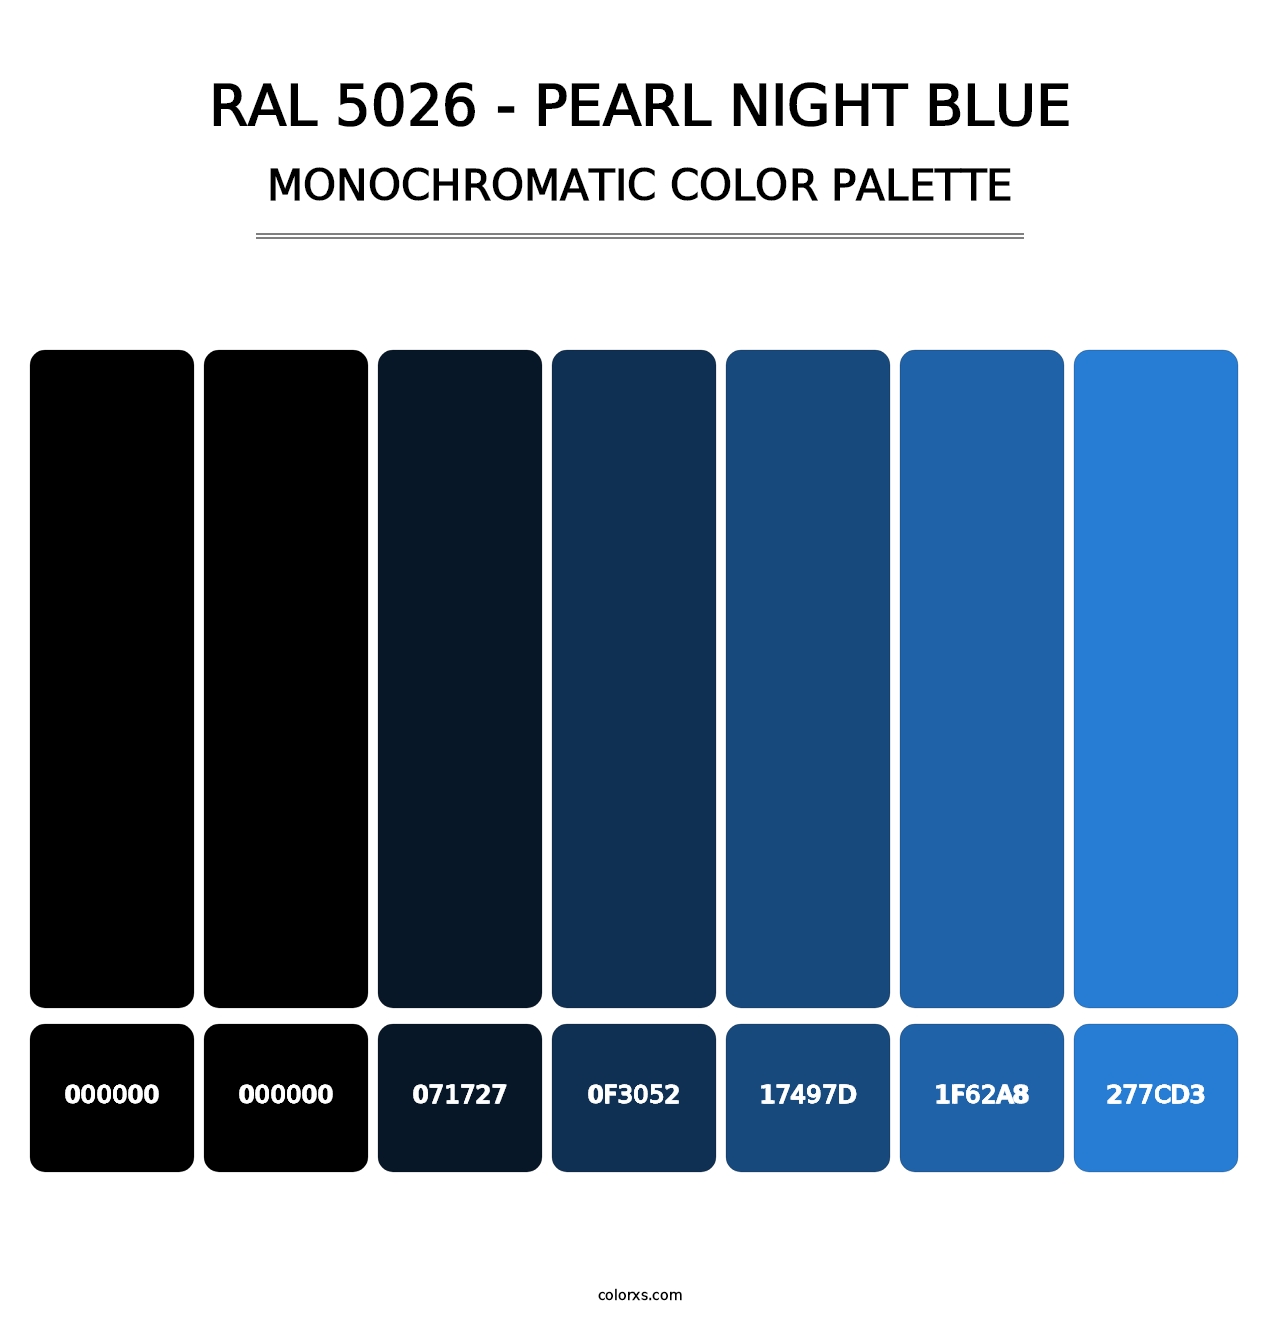 RAL 5026 - Pearl Night Blue - Monochromatic Color Palette